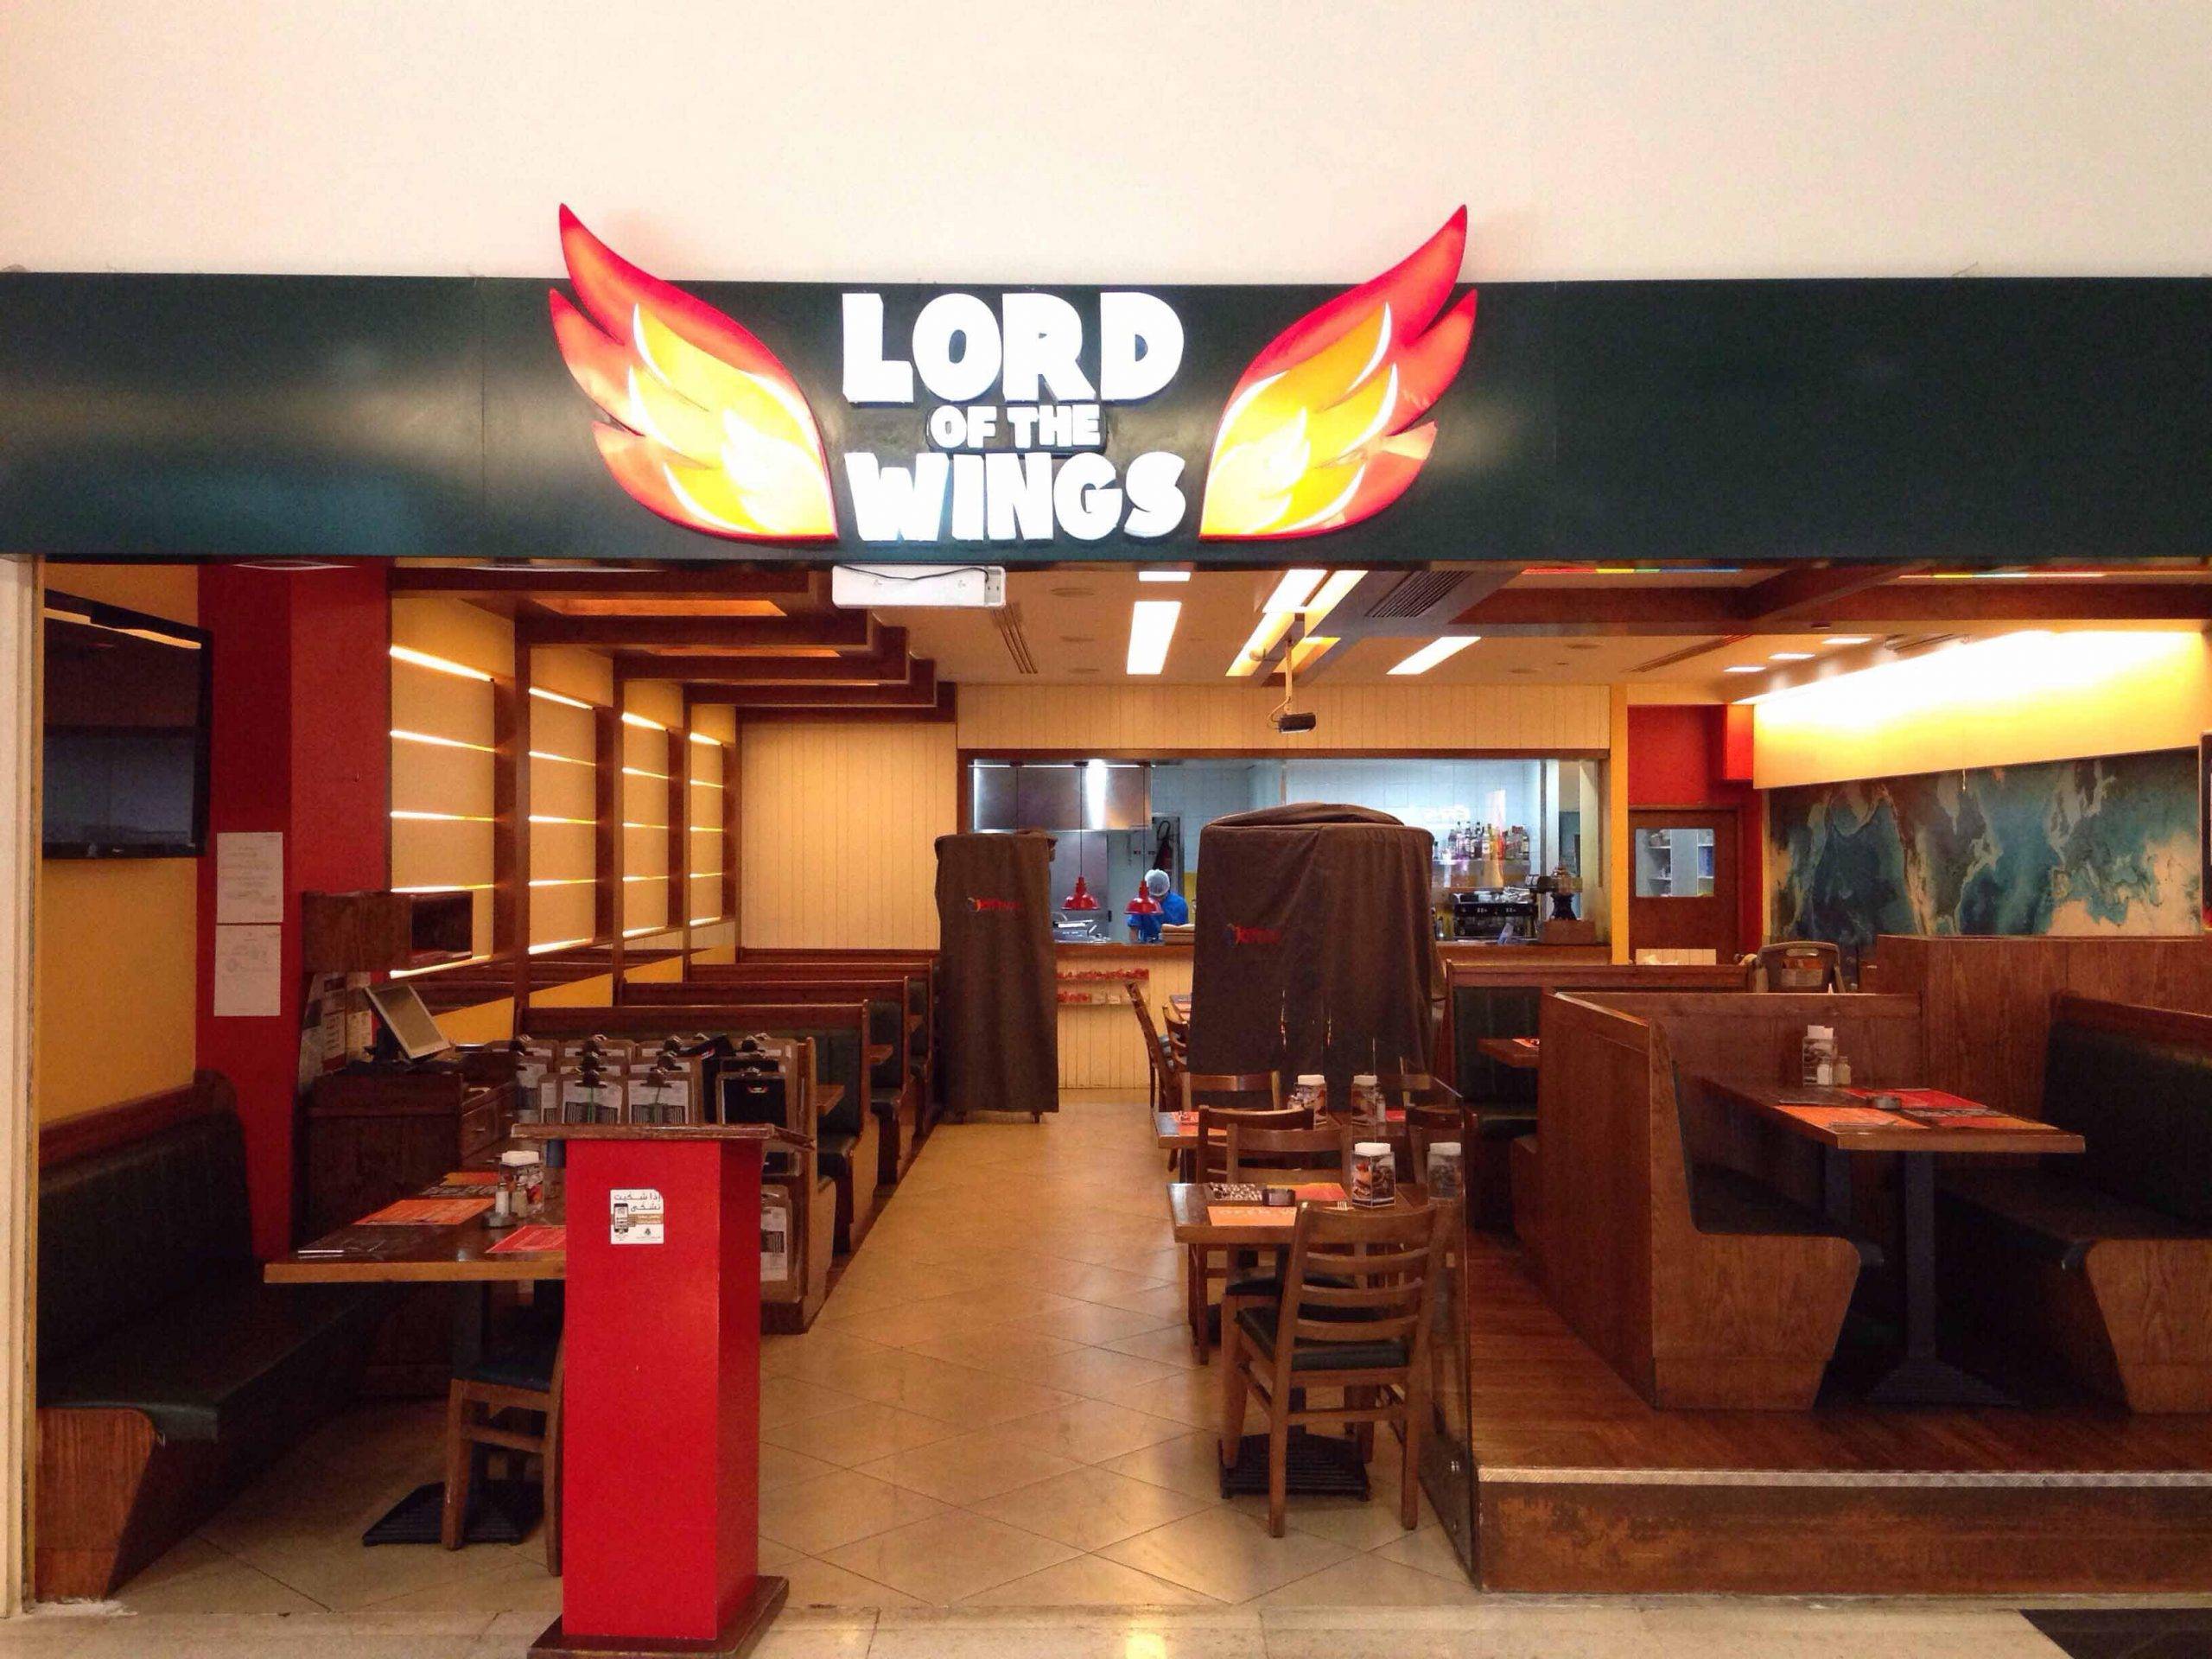 Lord Of The Wings